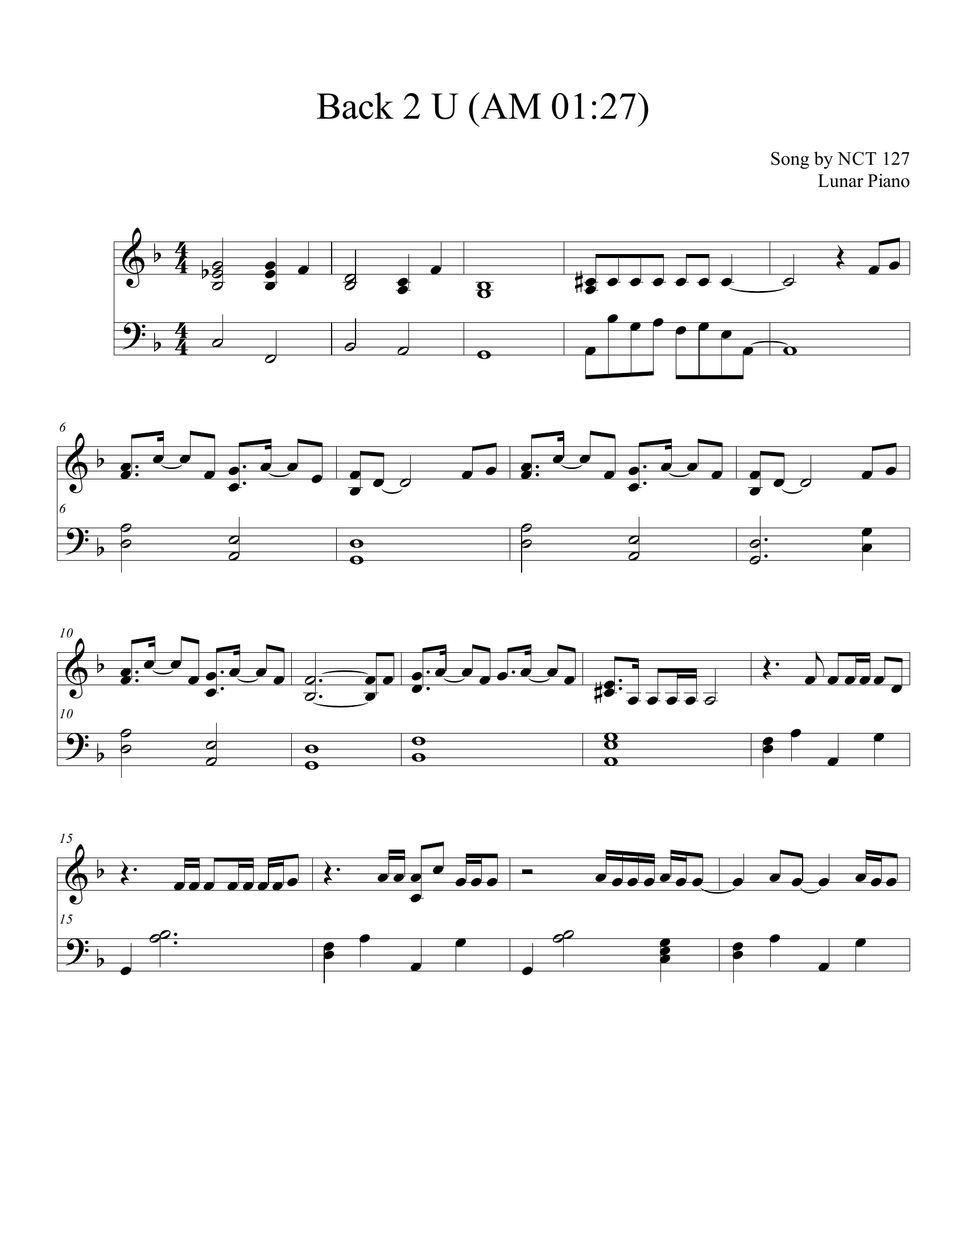 This is how Simon Says NCT 127 should go to Kingdom Sheet music for  Piano (Solo)